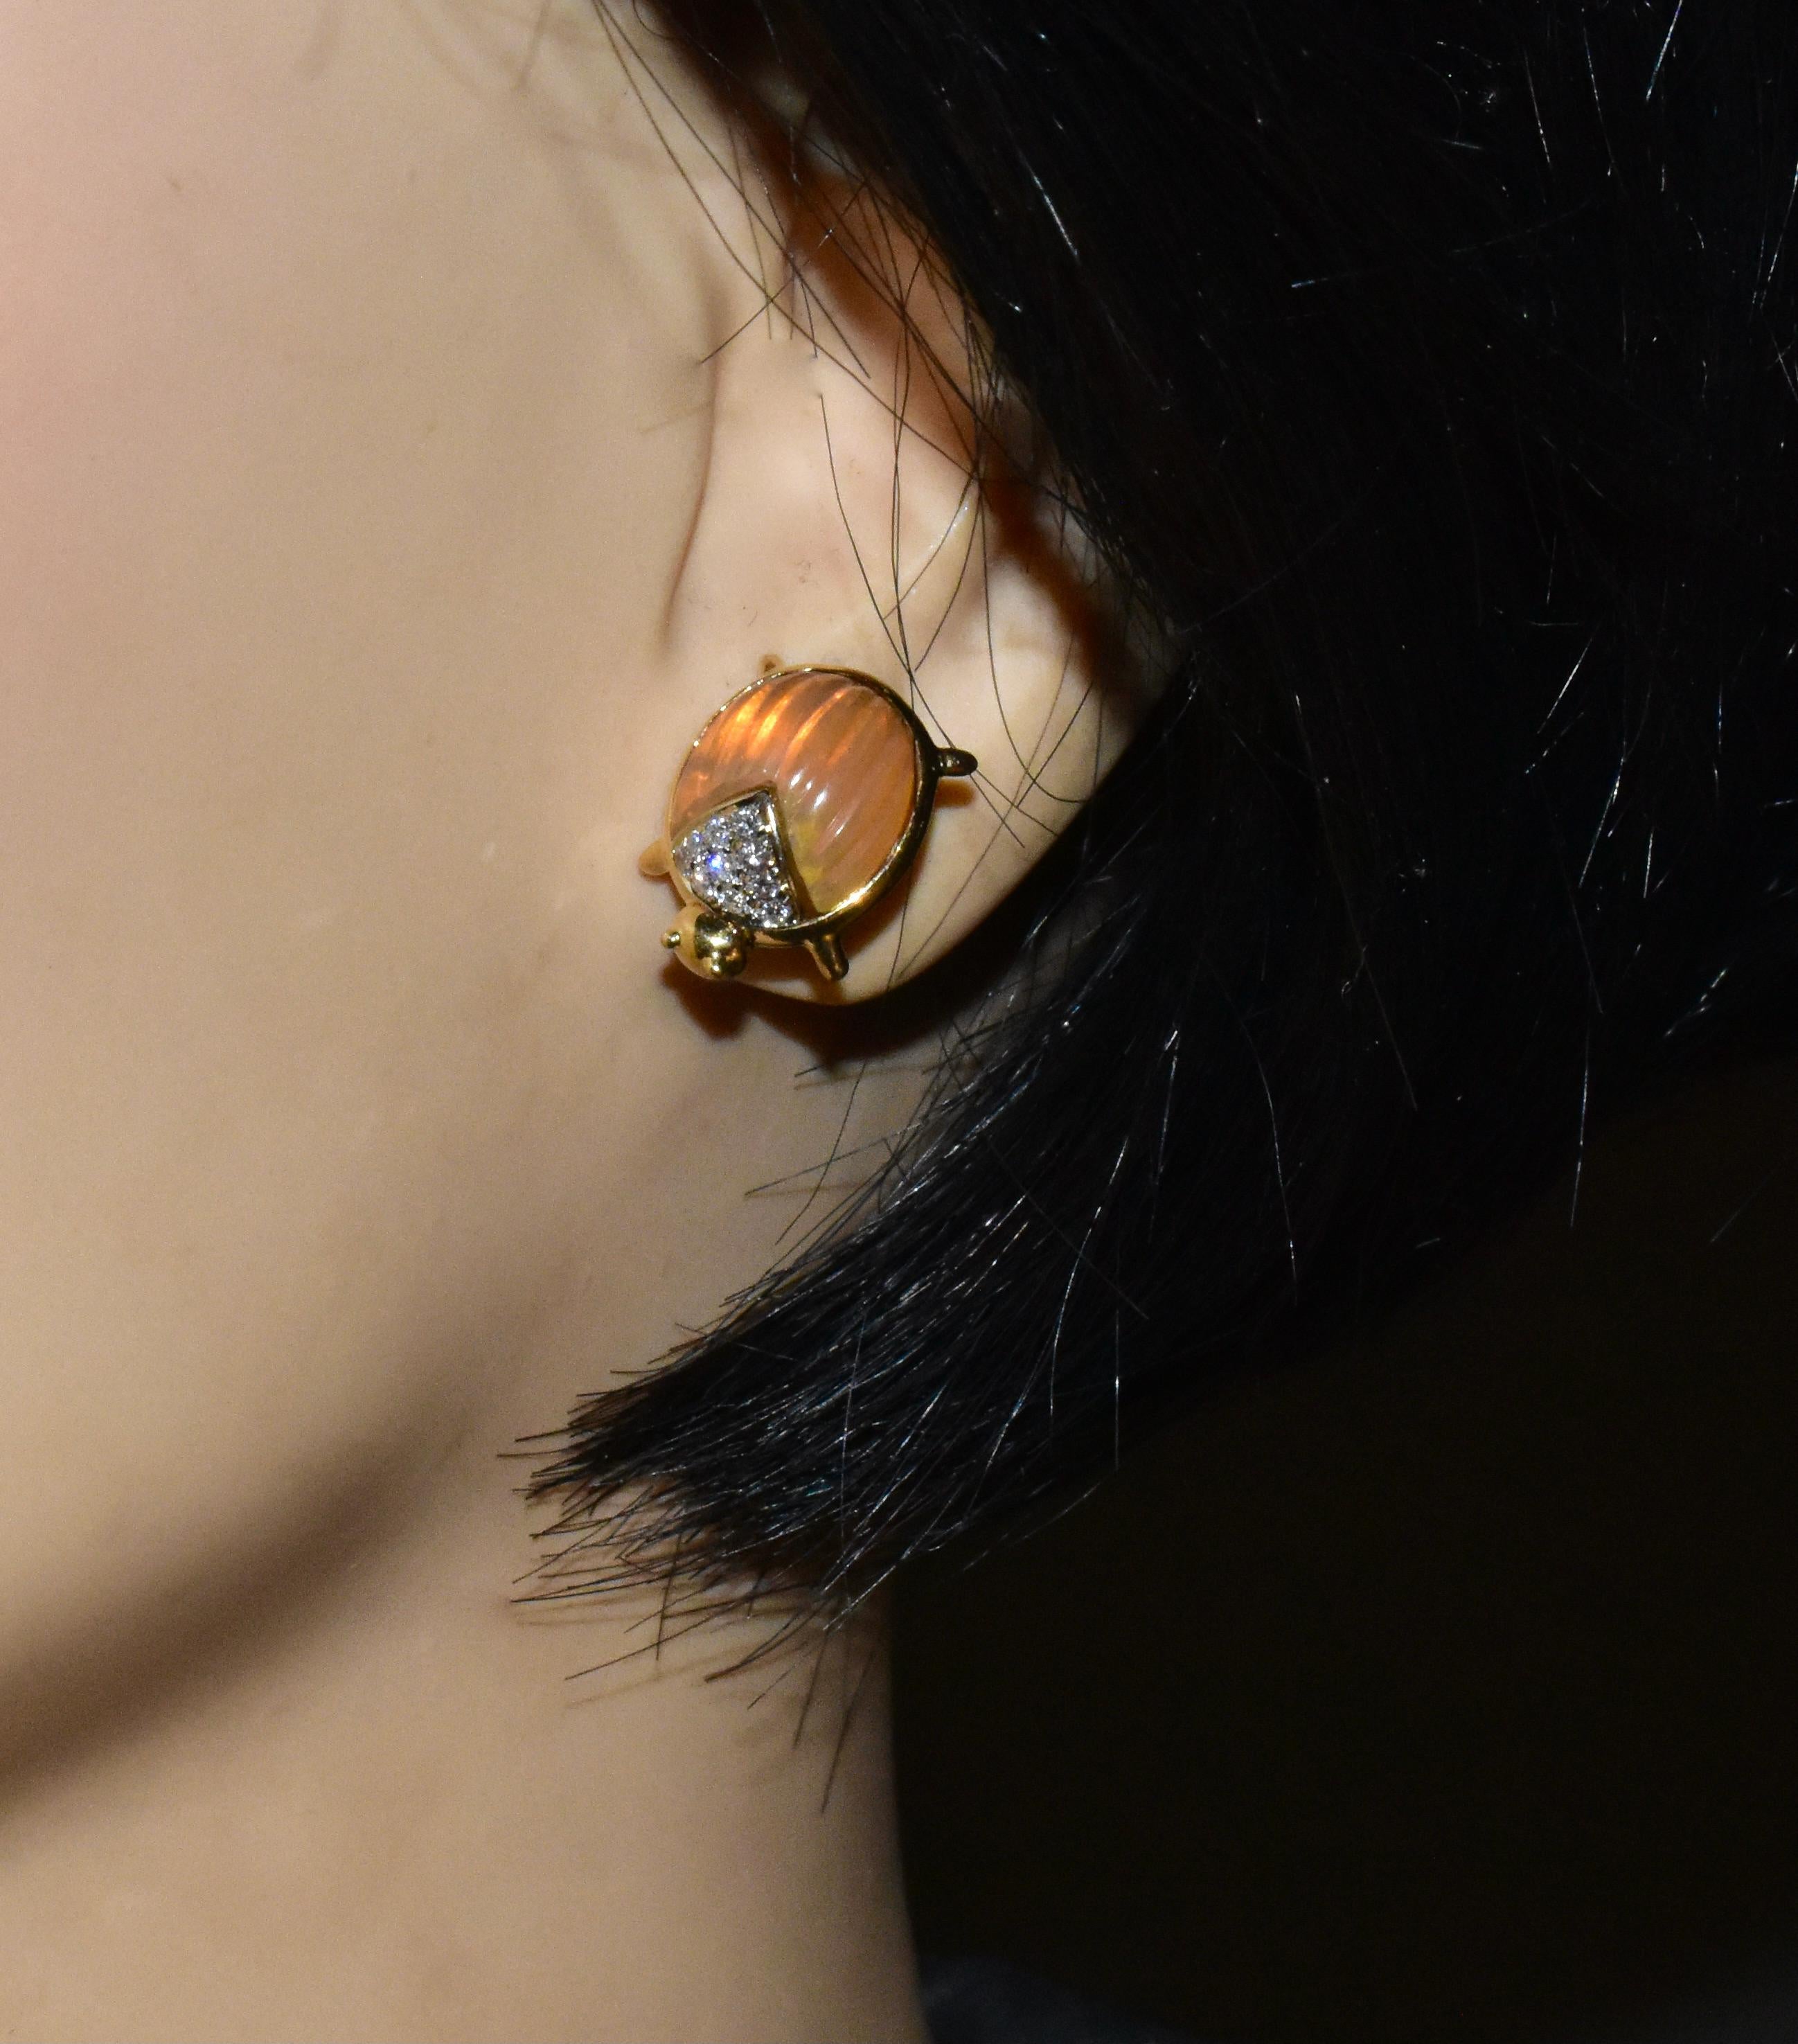 Contemporary 18K Lady Bug Earrings with fine Diamonds and Translucent Agate.